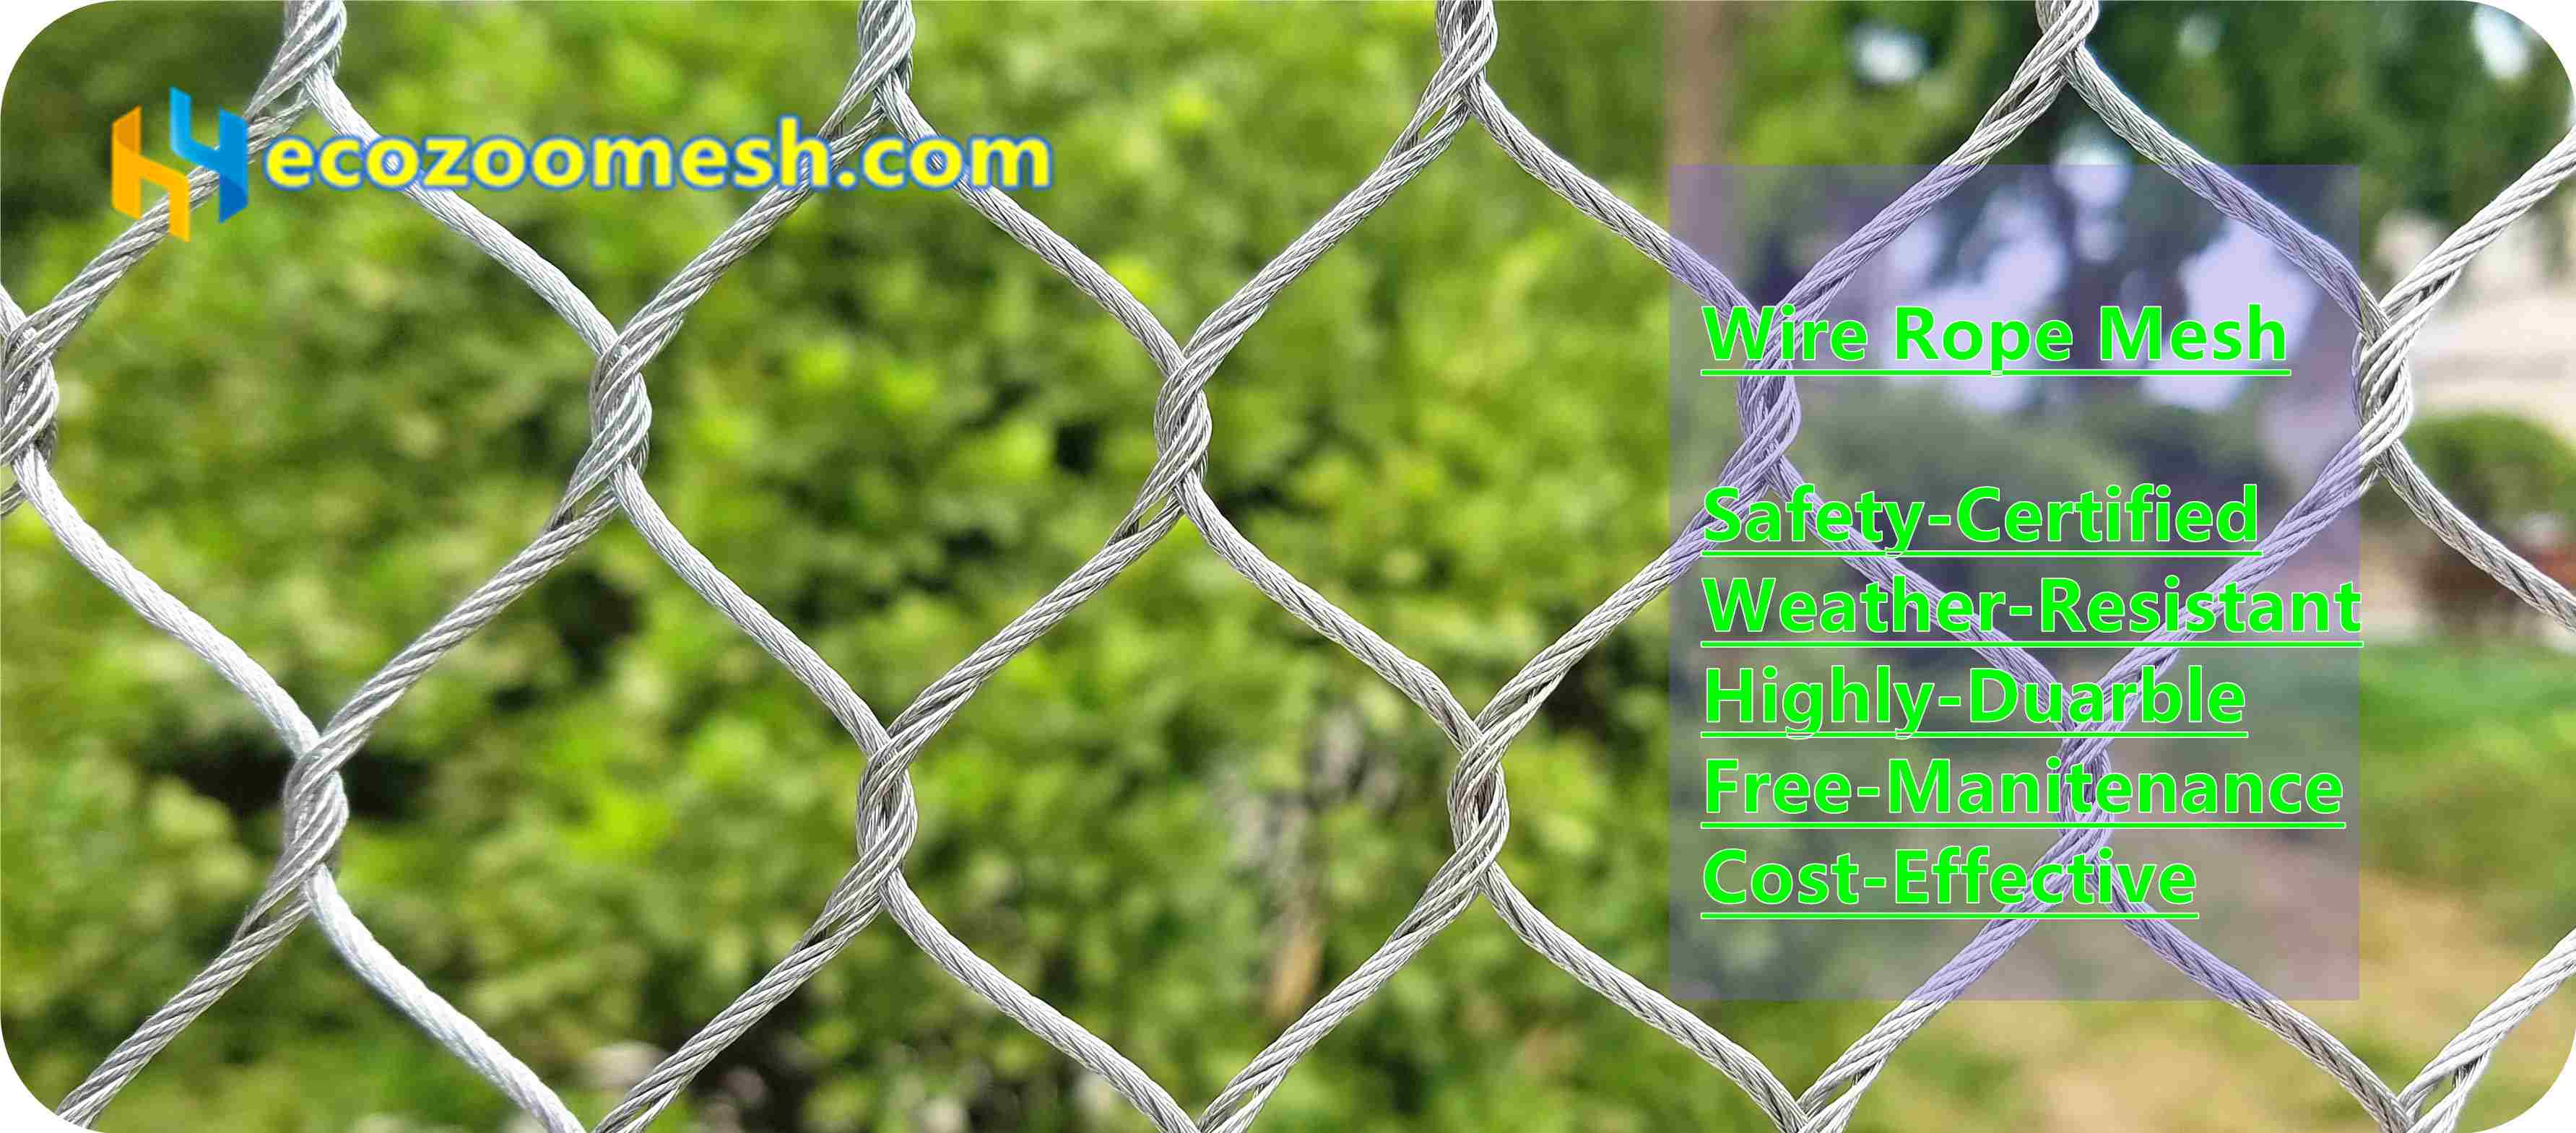 stainless steel rope mesh for deer fence